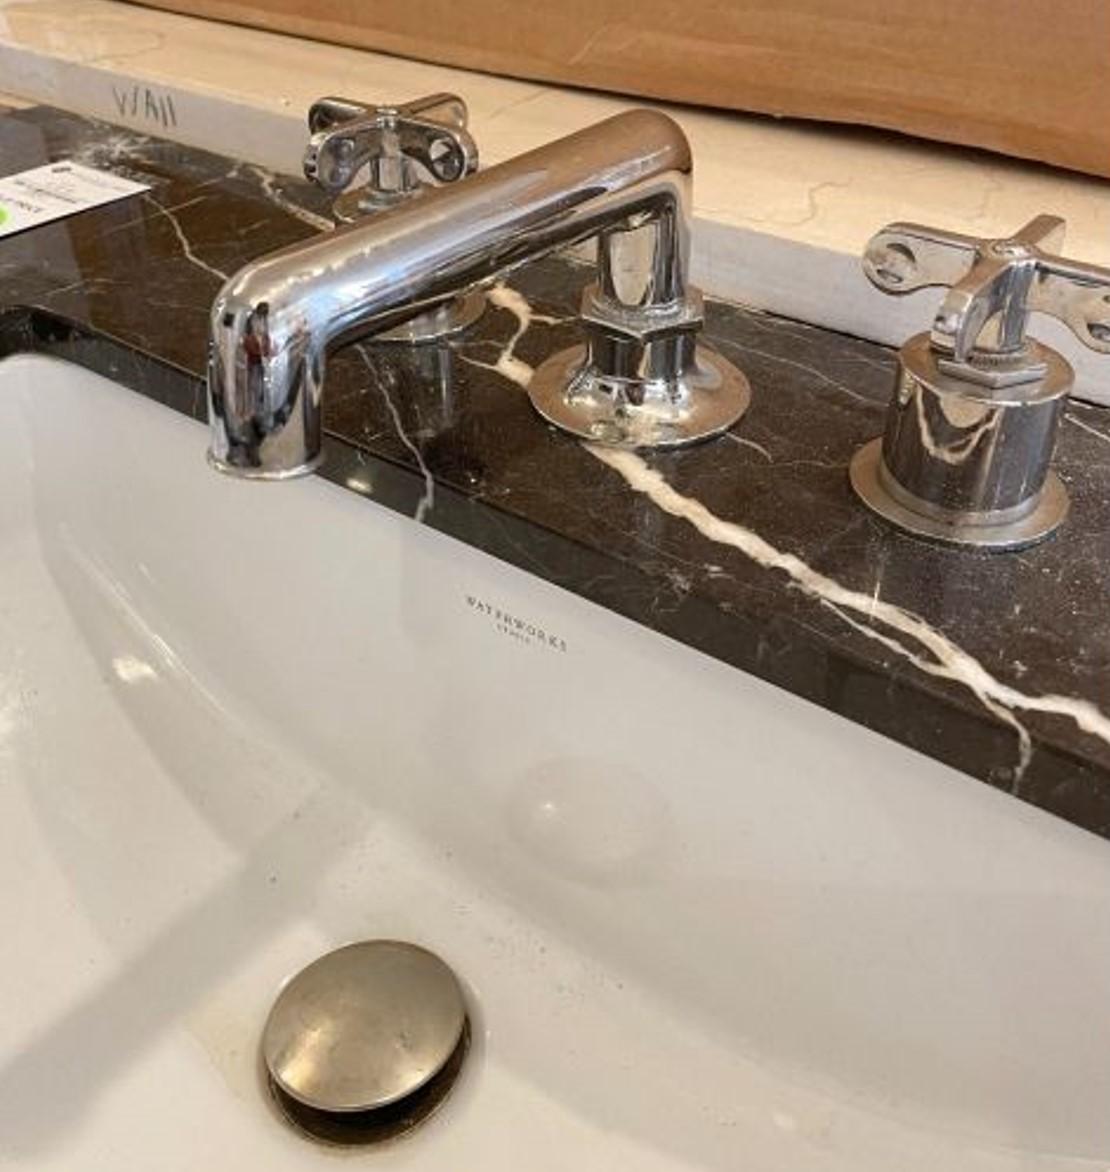 Custom made sink vanity made for 212 Fifth Avenue (Jeff Bezos home). 
Completely clad in Nero Marquino marble. Waterworks sink. 
Faucet not included but can be supplied upon request. 
30” wide with a single drawer. 